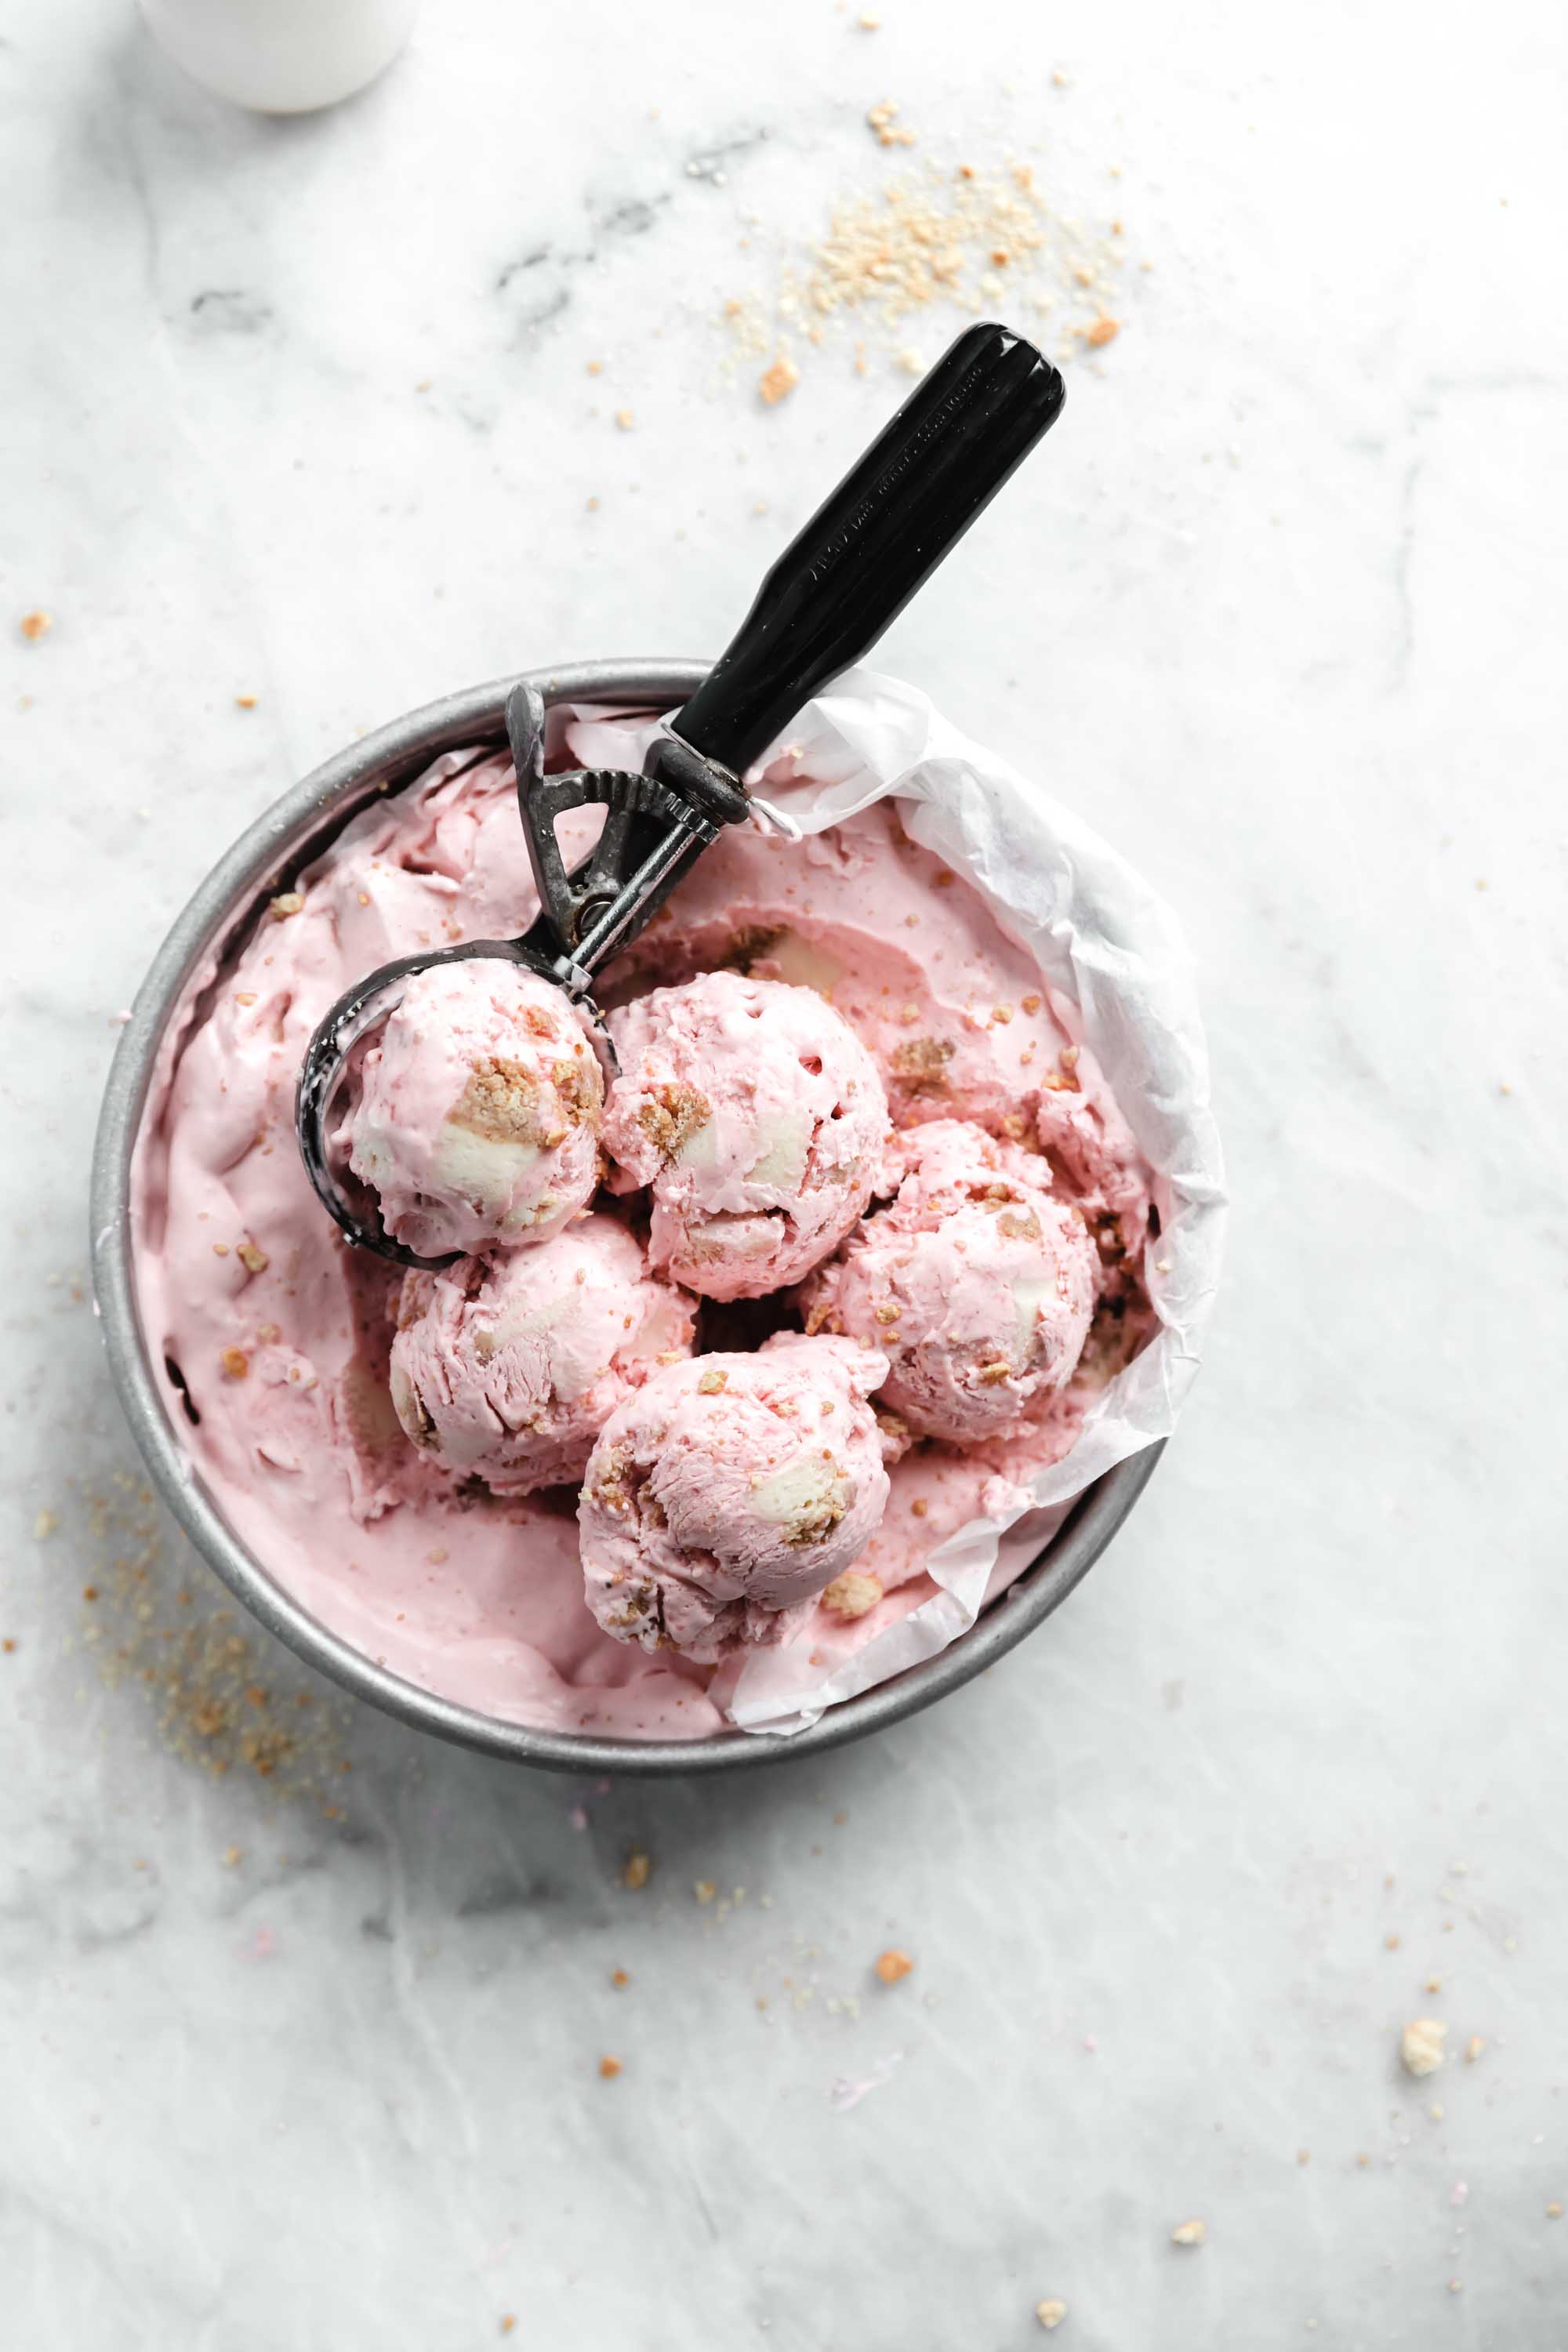 Kick off ice cream season with this easy and delicious no churn strawberry cheesecake ice cream. Creamy strawberry ice cream mixed with chunks of cheesecake. YUM.